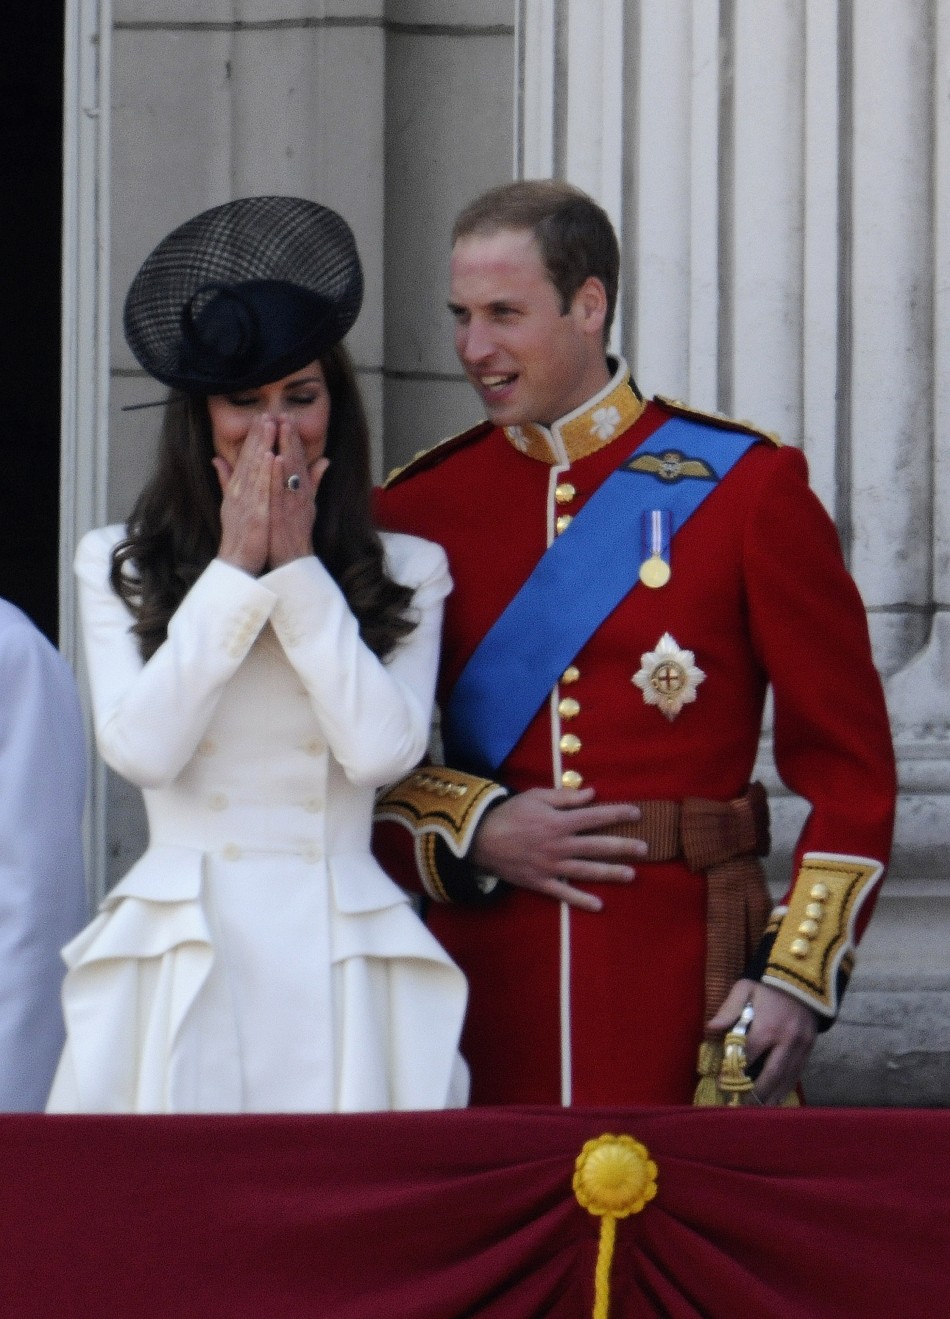 Britain039s Prince William and his wife Catherine, Duchess of Cambridge, share a light moment on the balcony of Buckingham Palace after attending the Trooping the Colour ceremony in central London